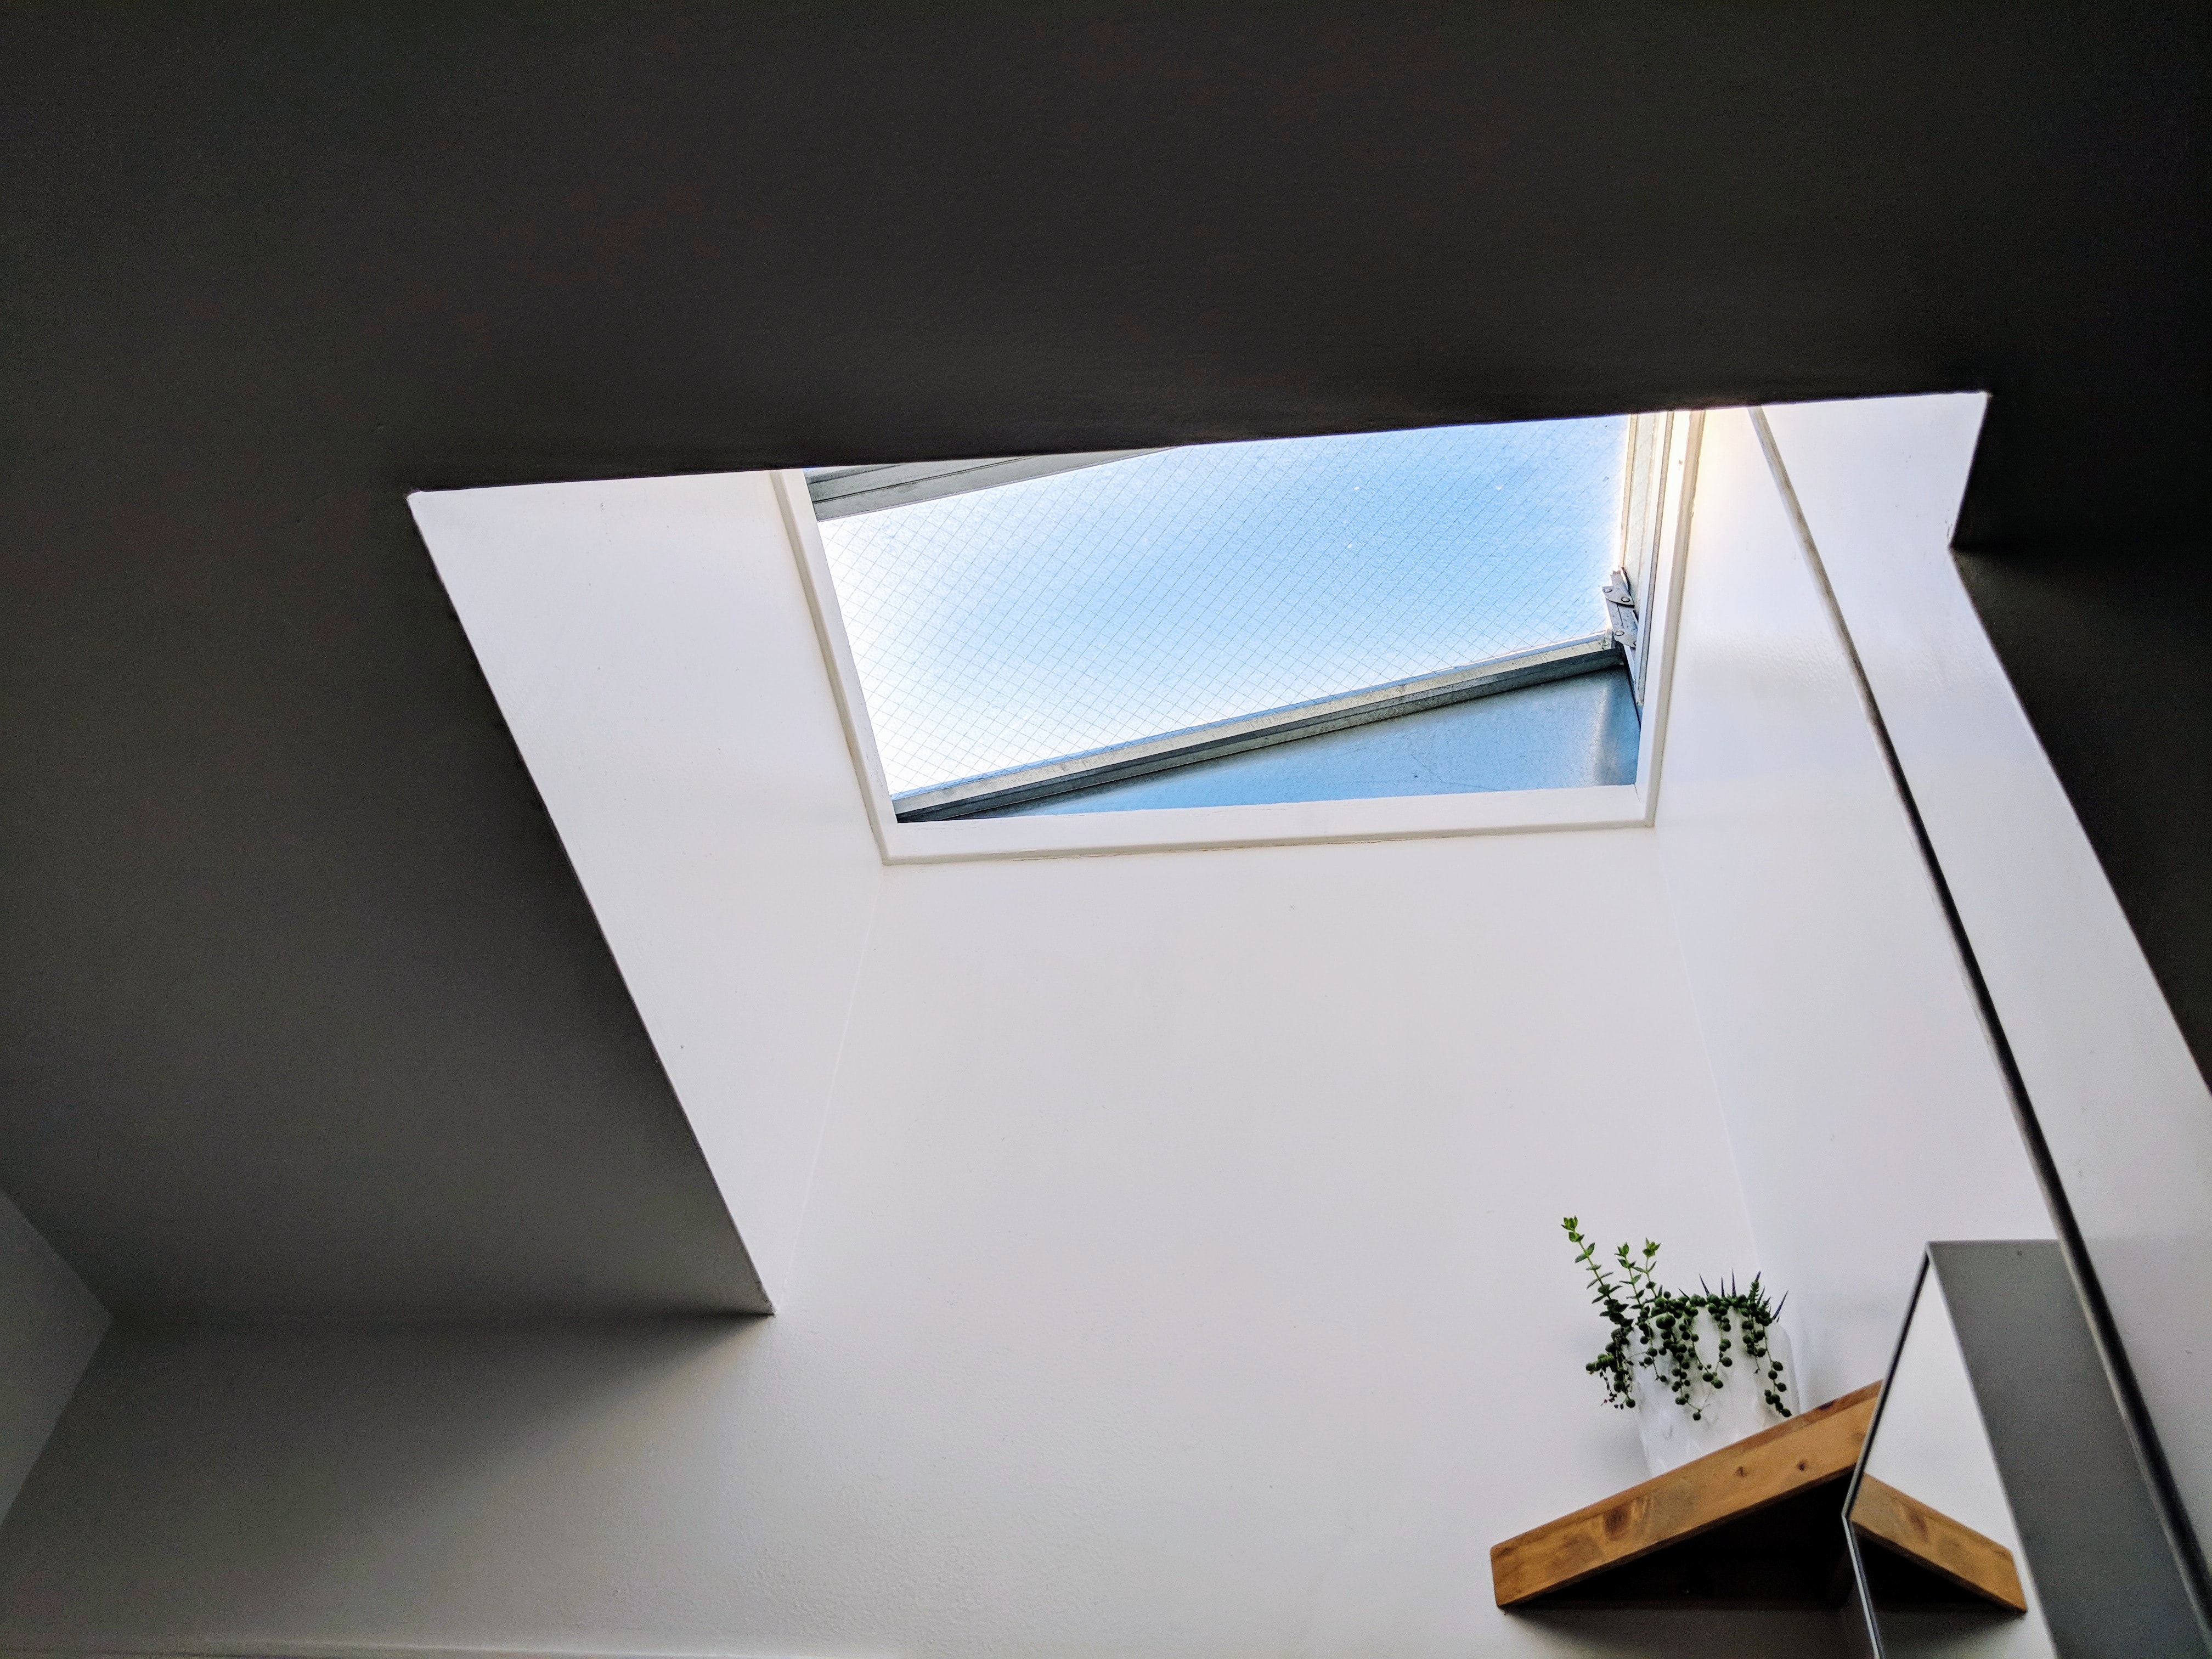 Is it possible to install a skylight on a flat roof?